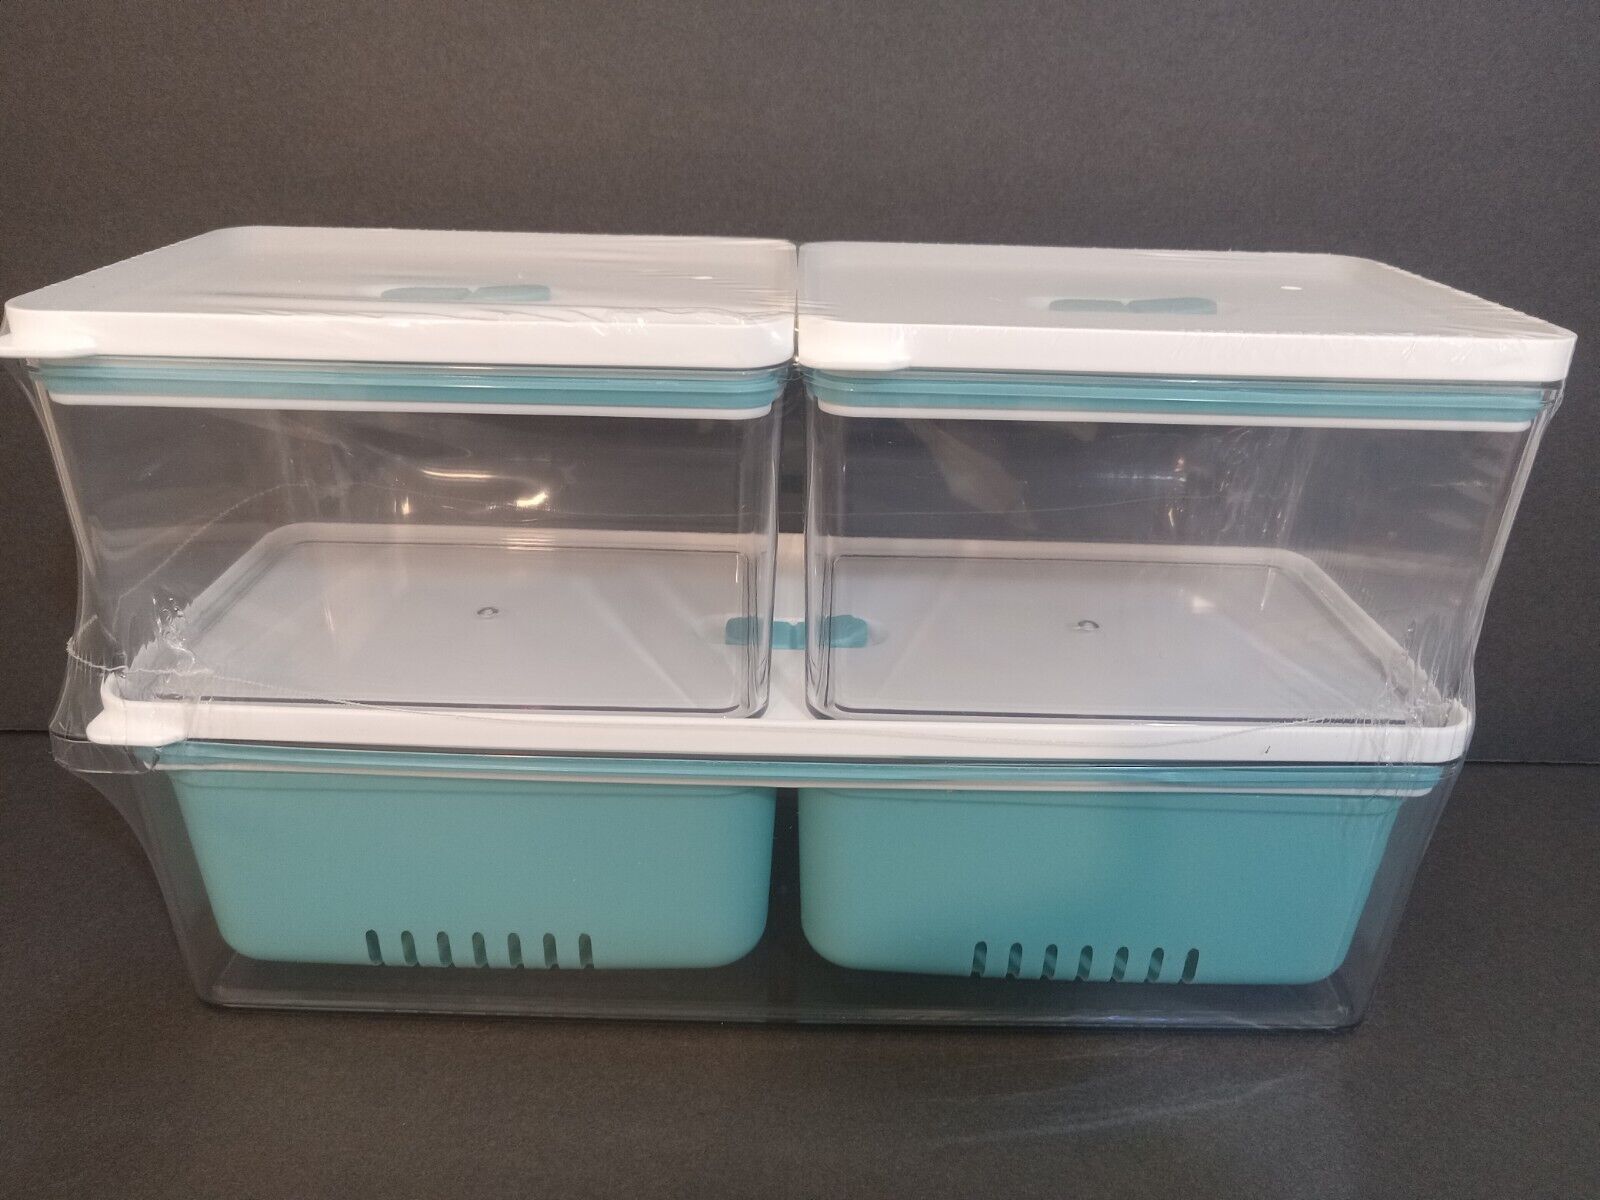 Vegetable Refrigerator Container Hard Plastic With Lids Clear White Turquoise